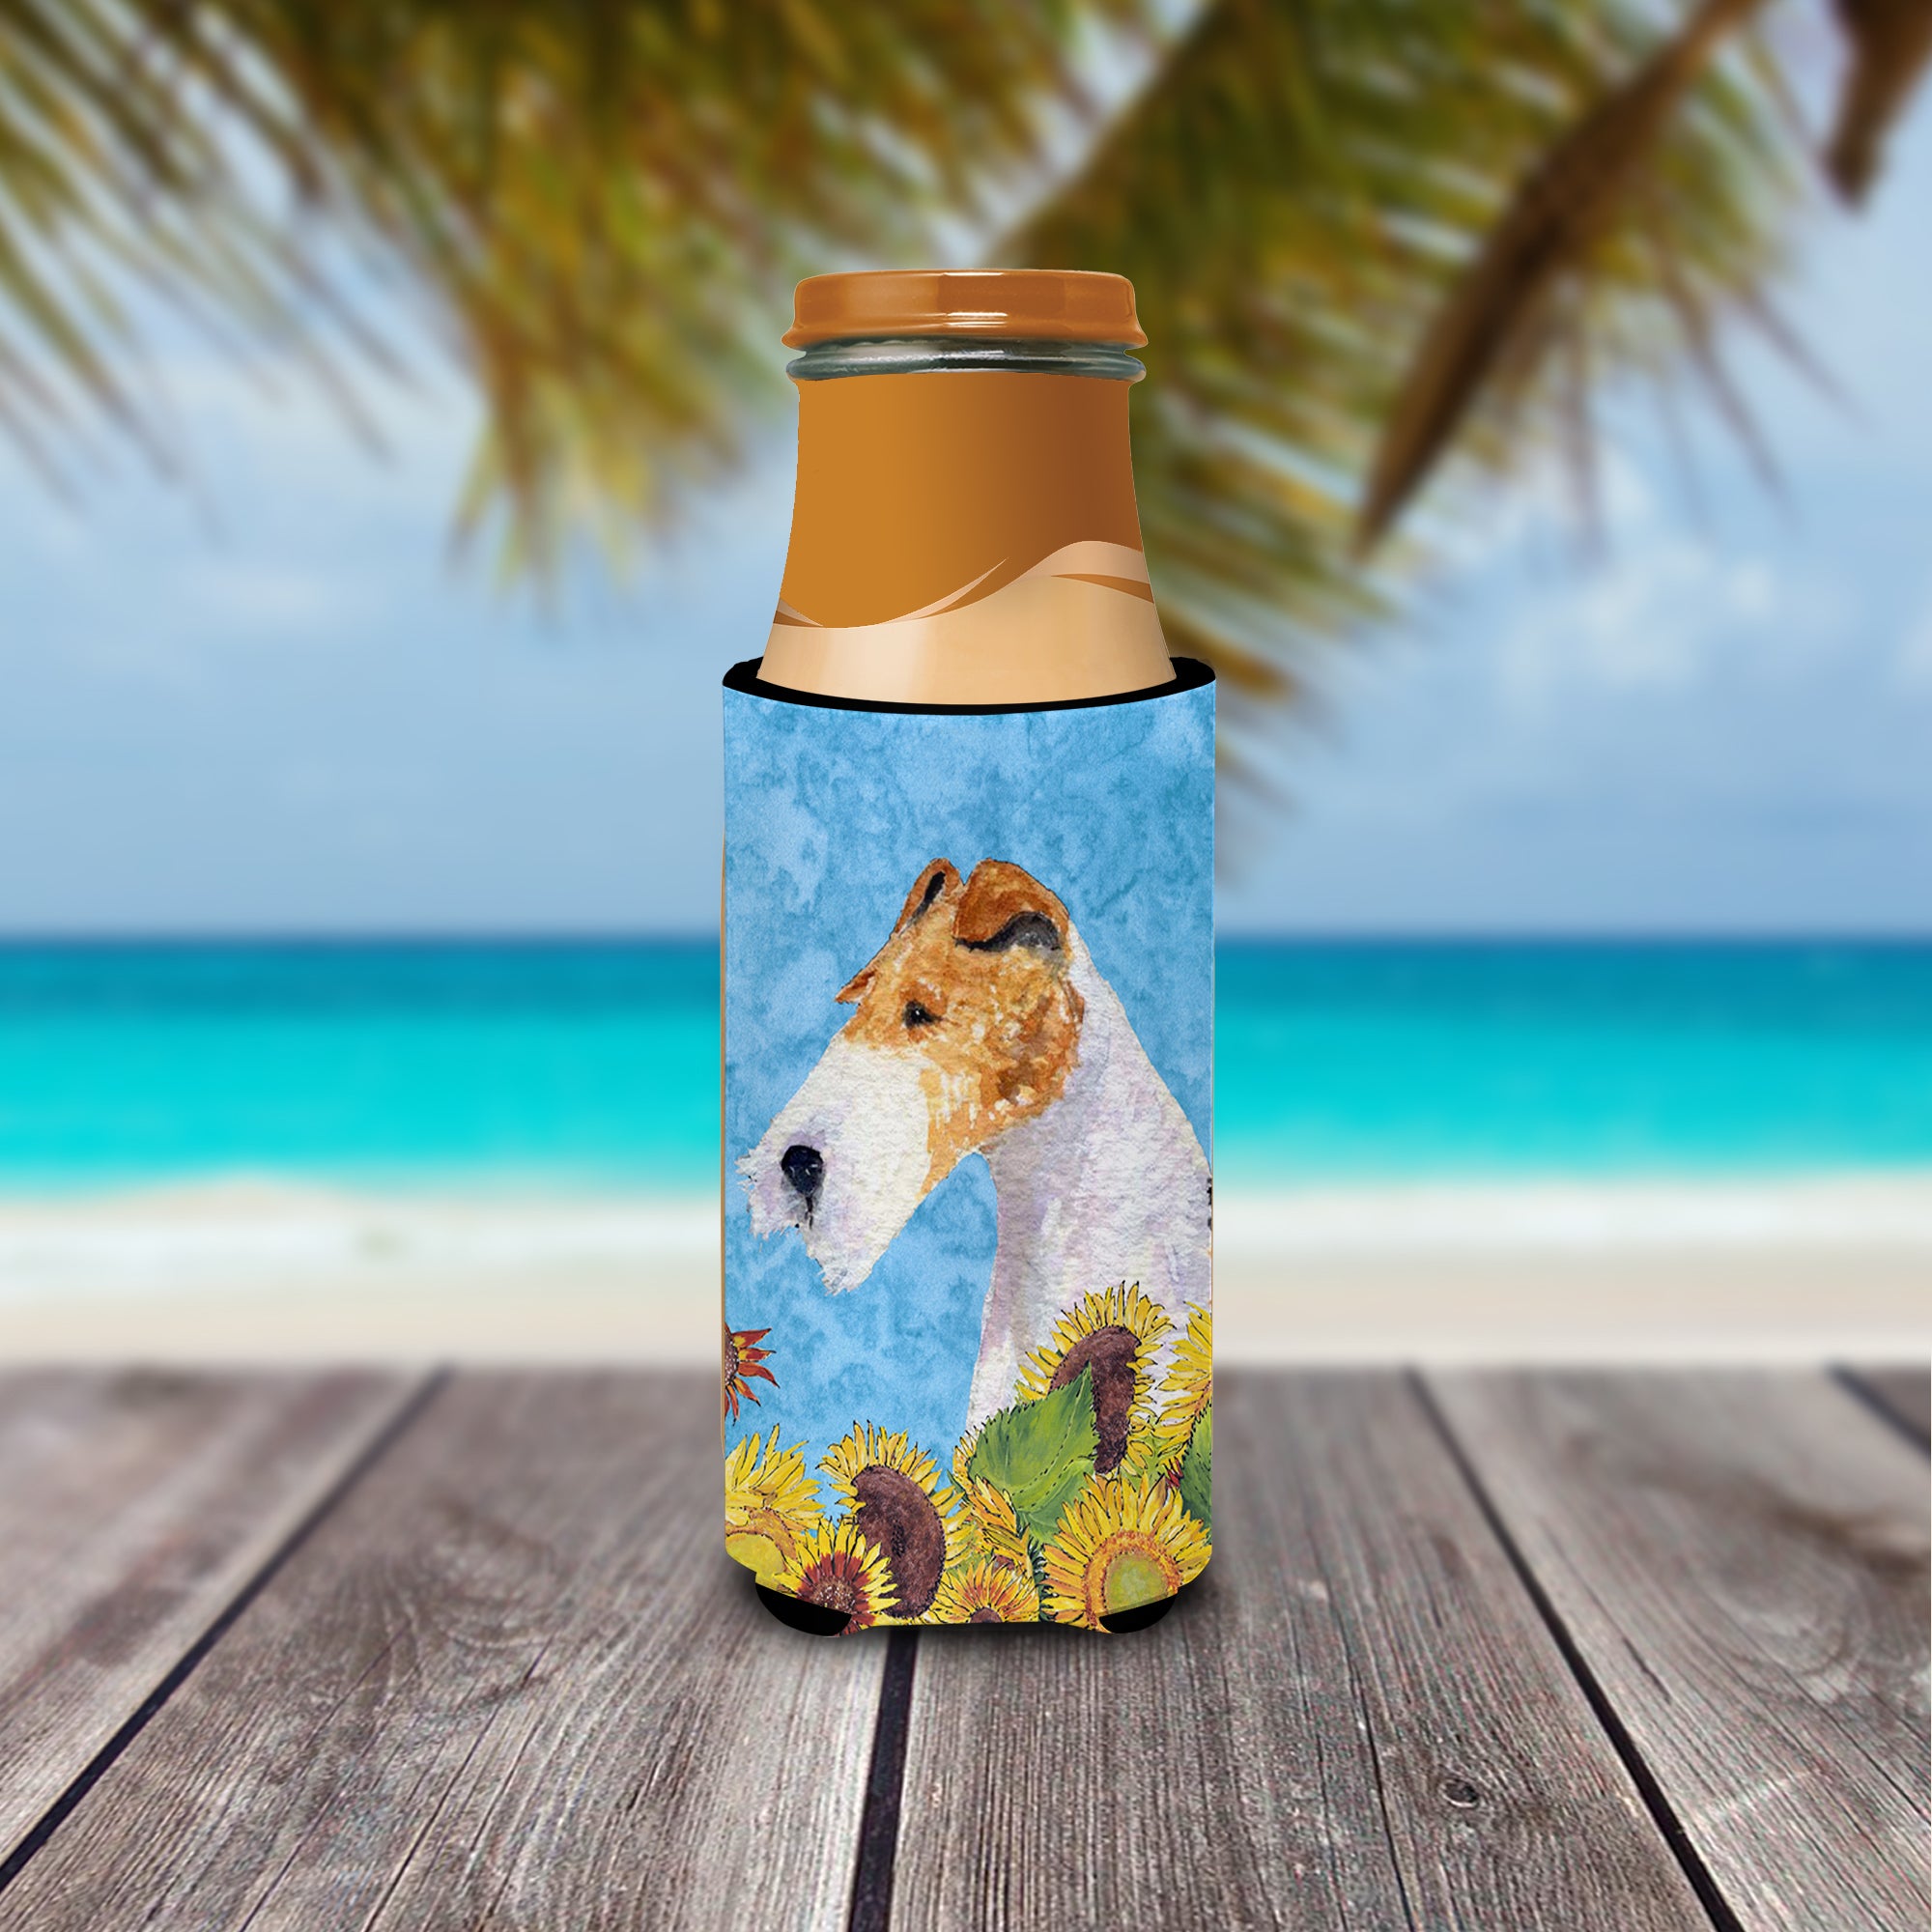 Fox Terrier in Summer Flowers Ultra Beverage Insulators for slim cans SS4111MUK.